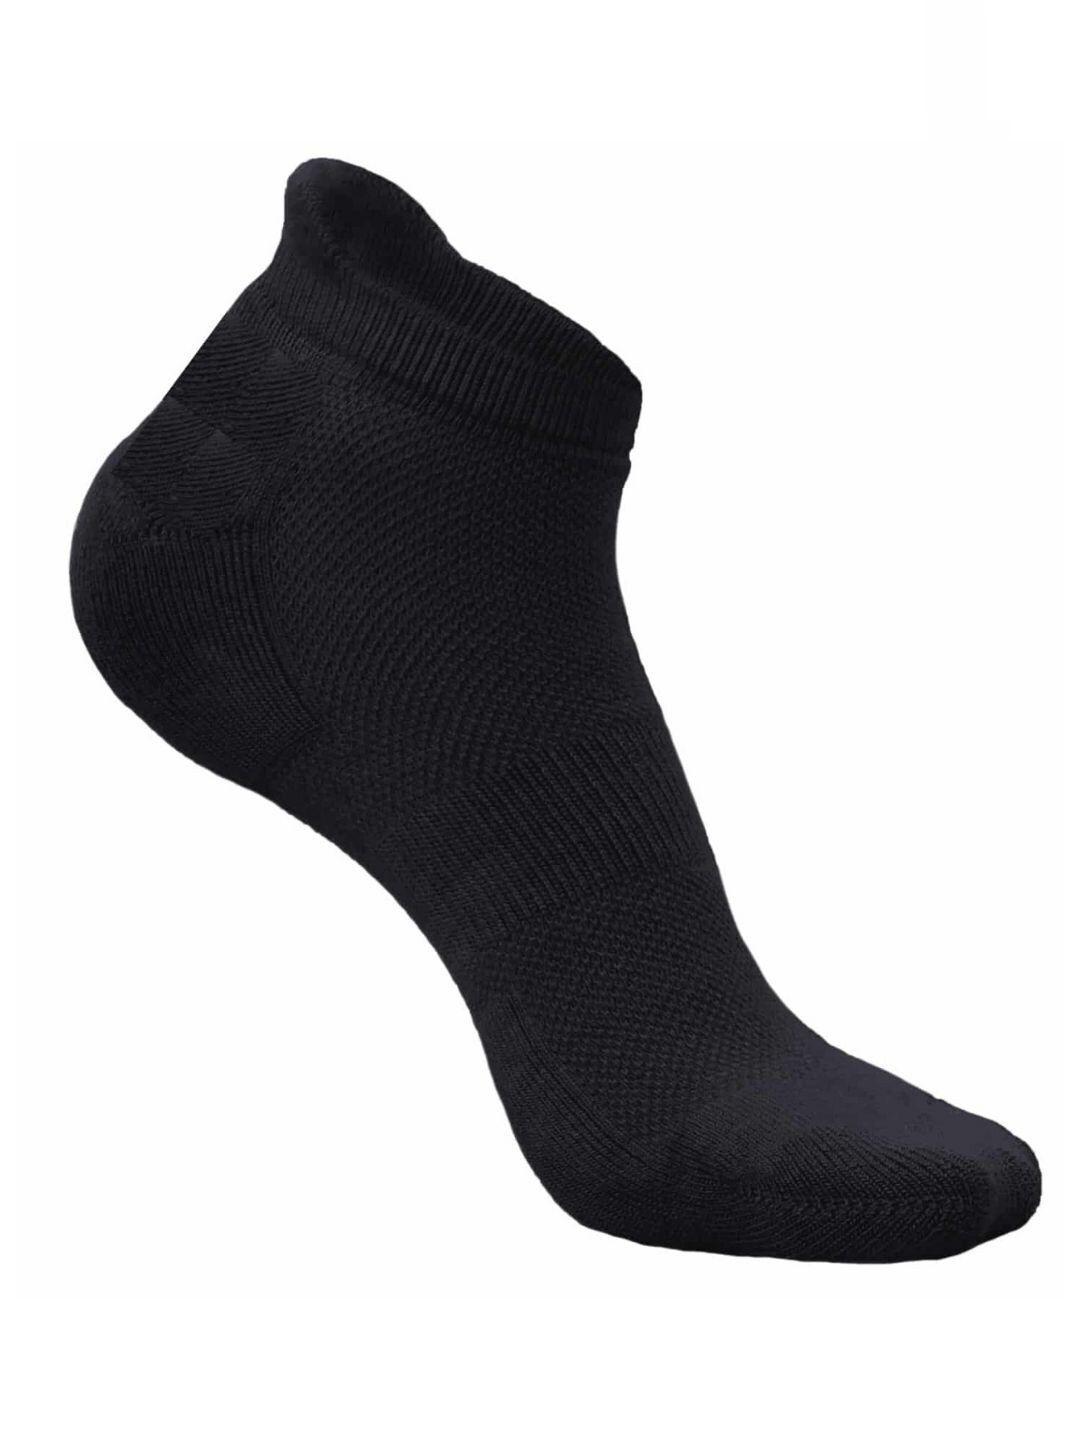 enable nature unisex anti-bacterial odor-resistant breathable ankle-length socks